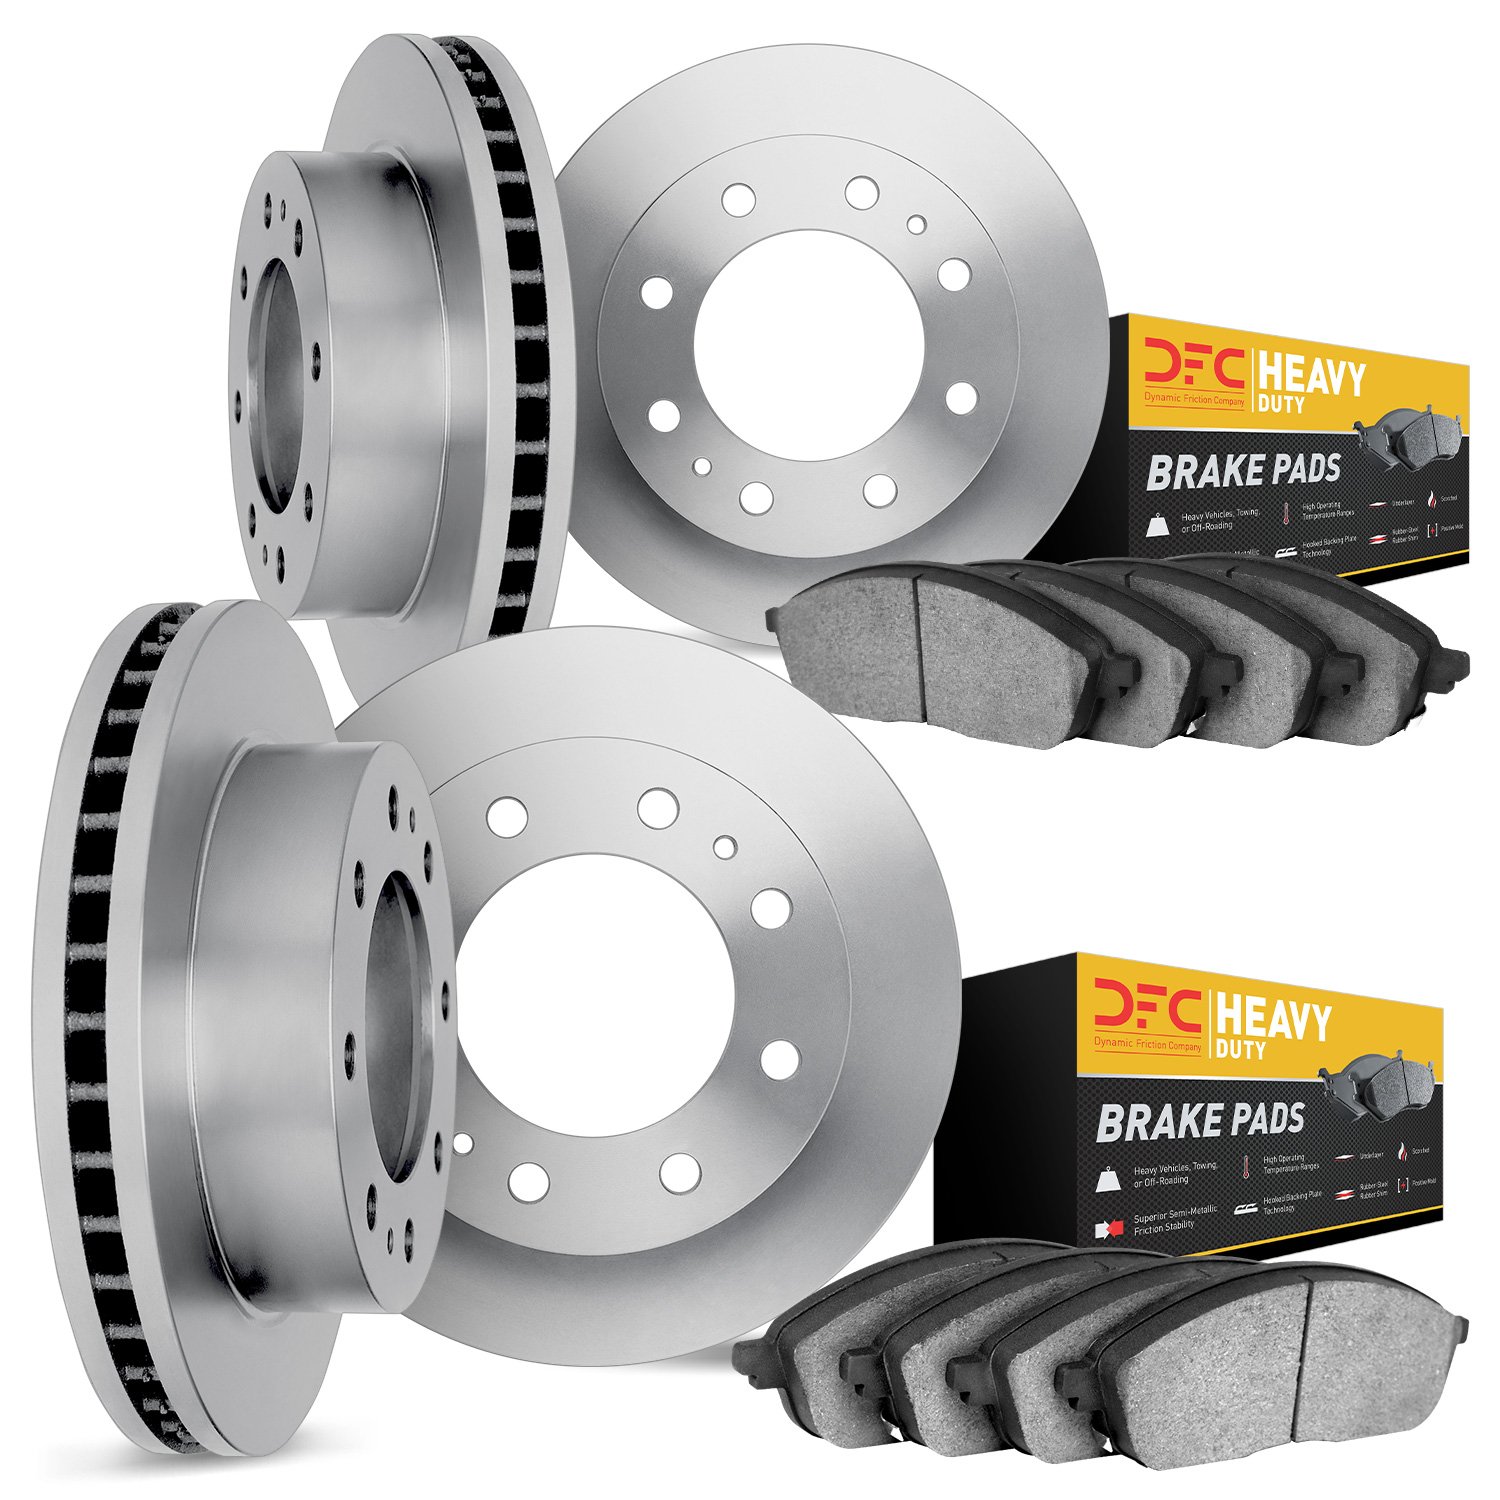 6204-48444 Brake Rotors w/Heavy-Duty Brake Pads Kit, 2001-2010 GM, Position: Front and Rear